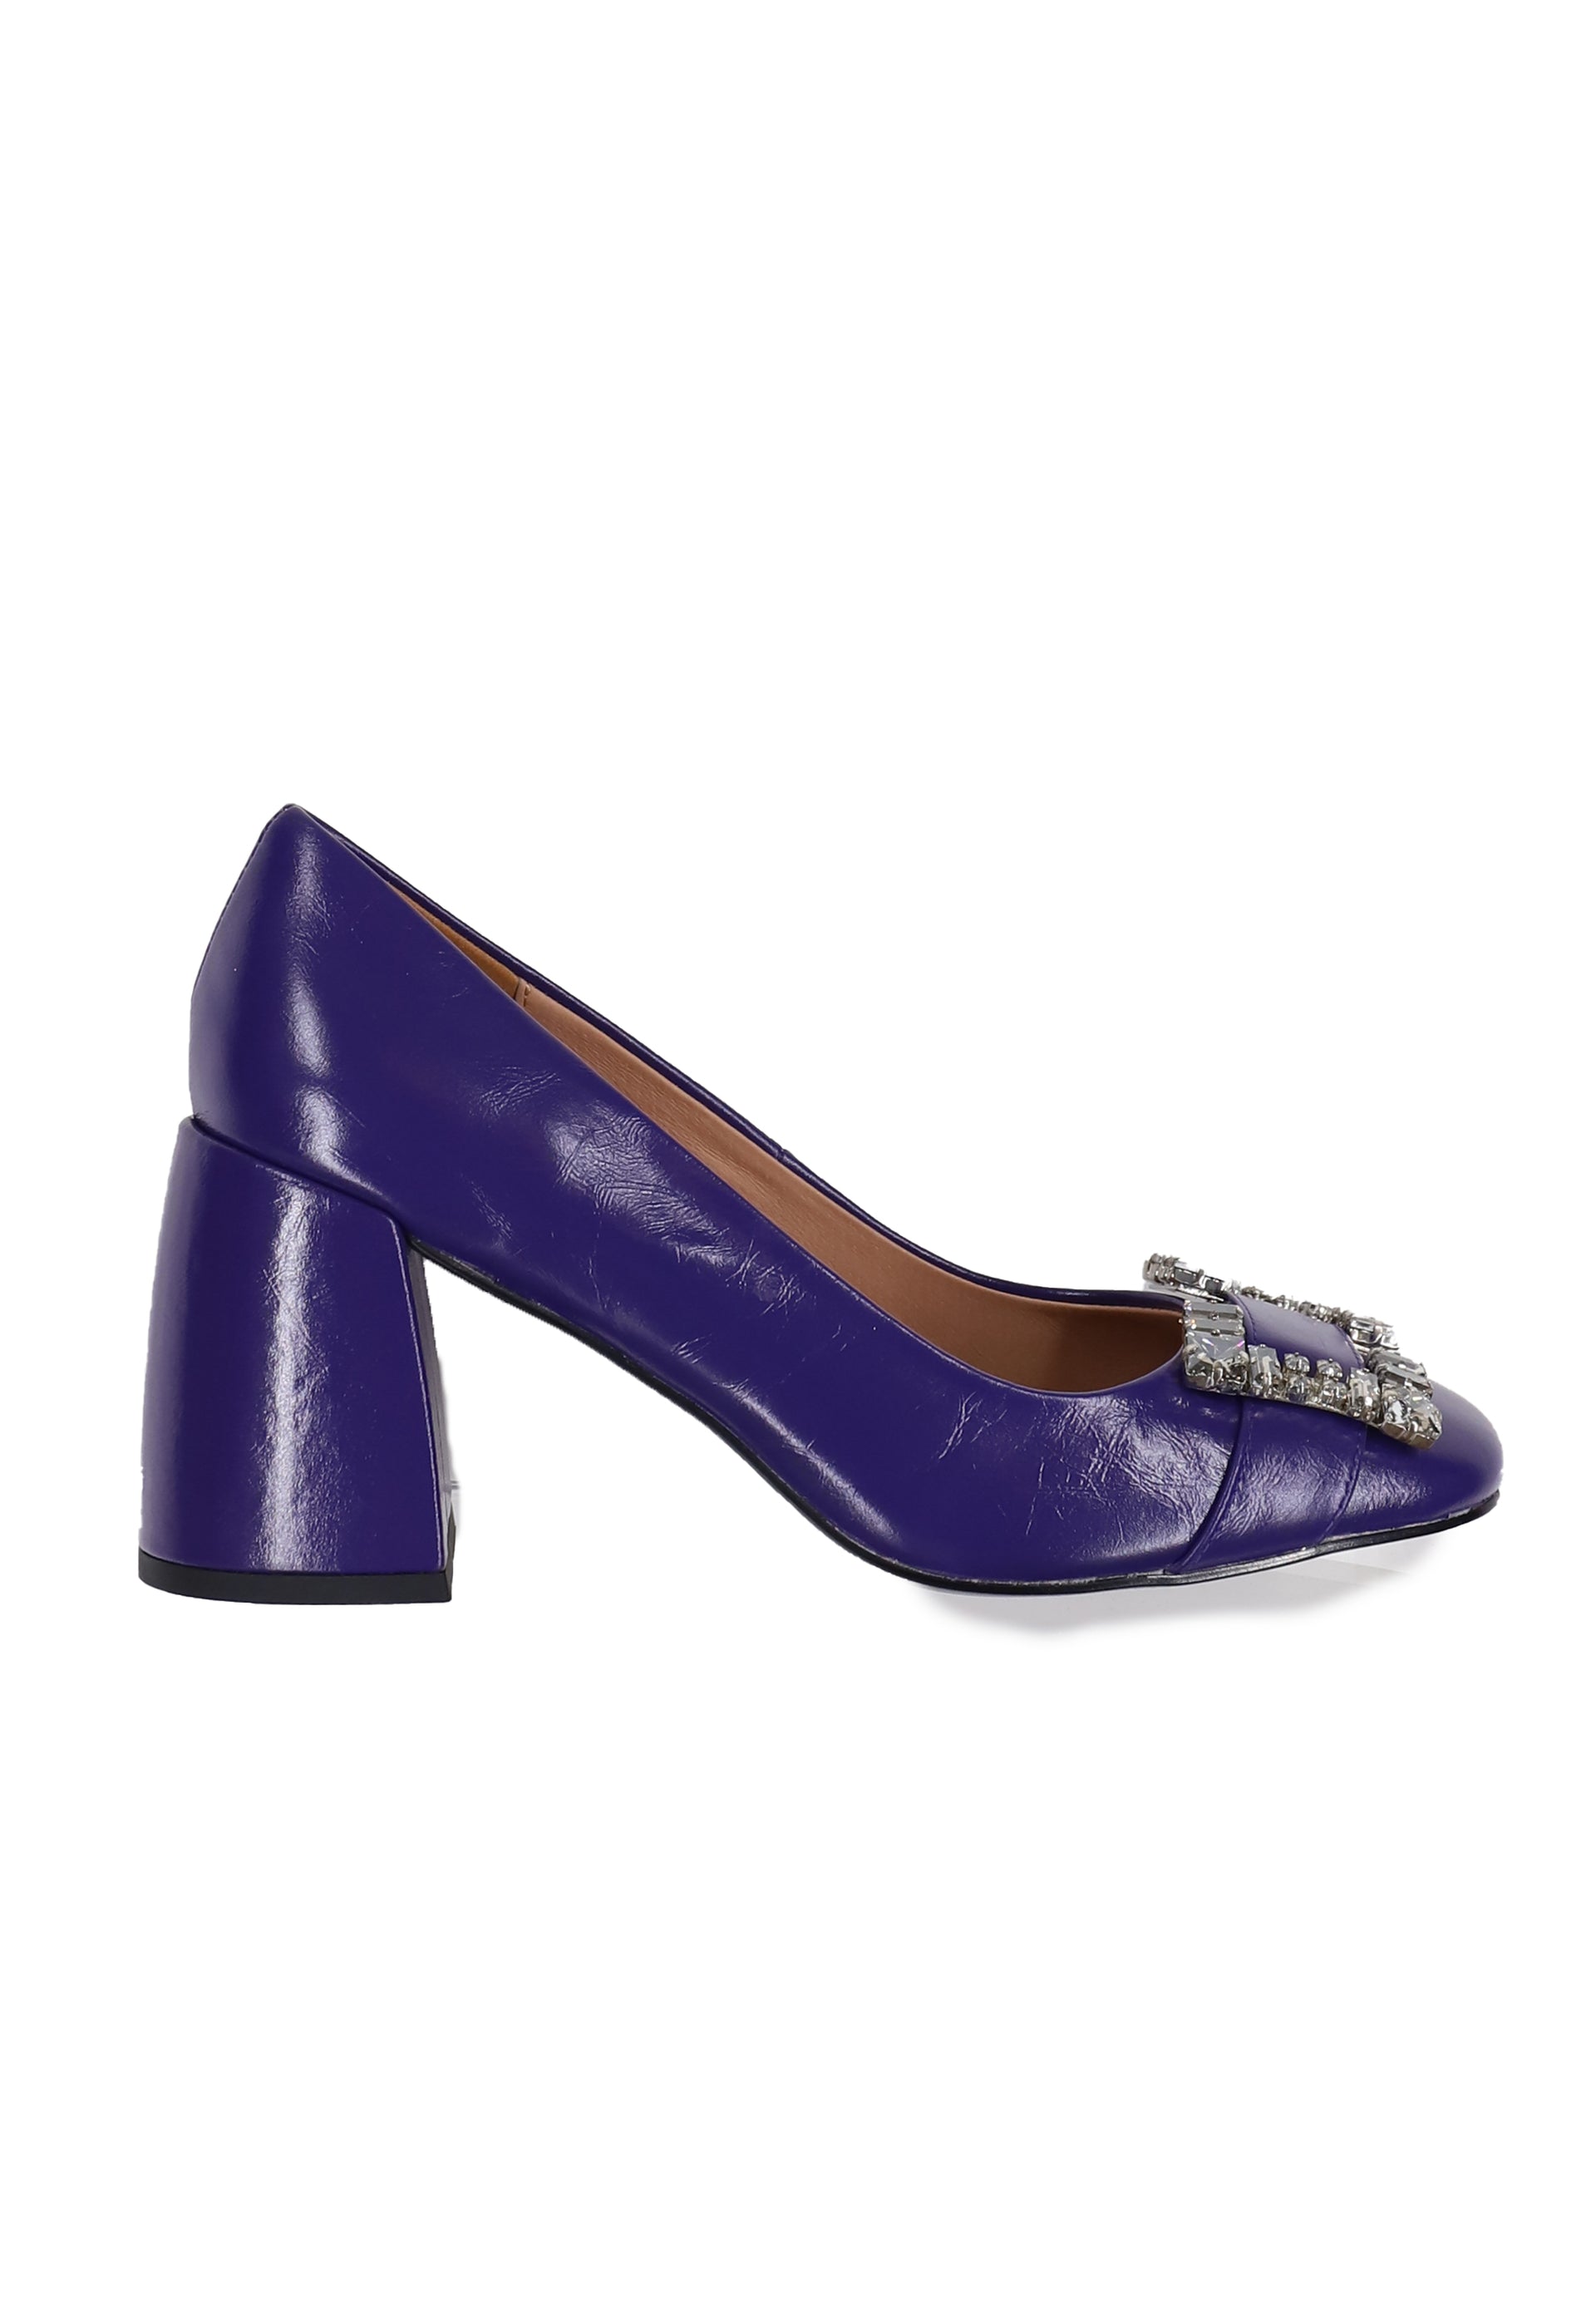 Women's pumps in purple shiny leather with rhinestone buckle and Adella high heel